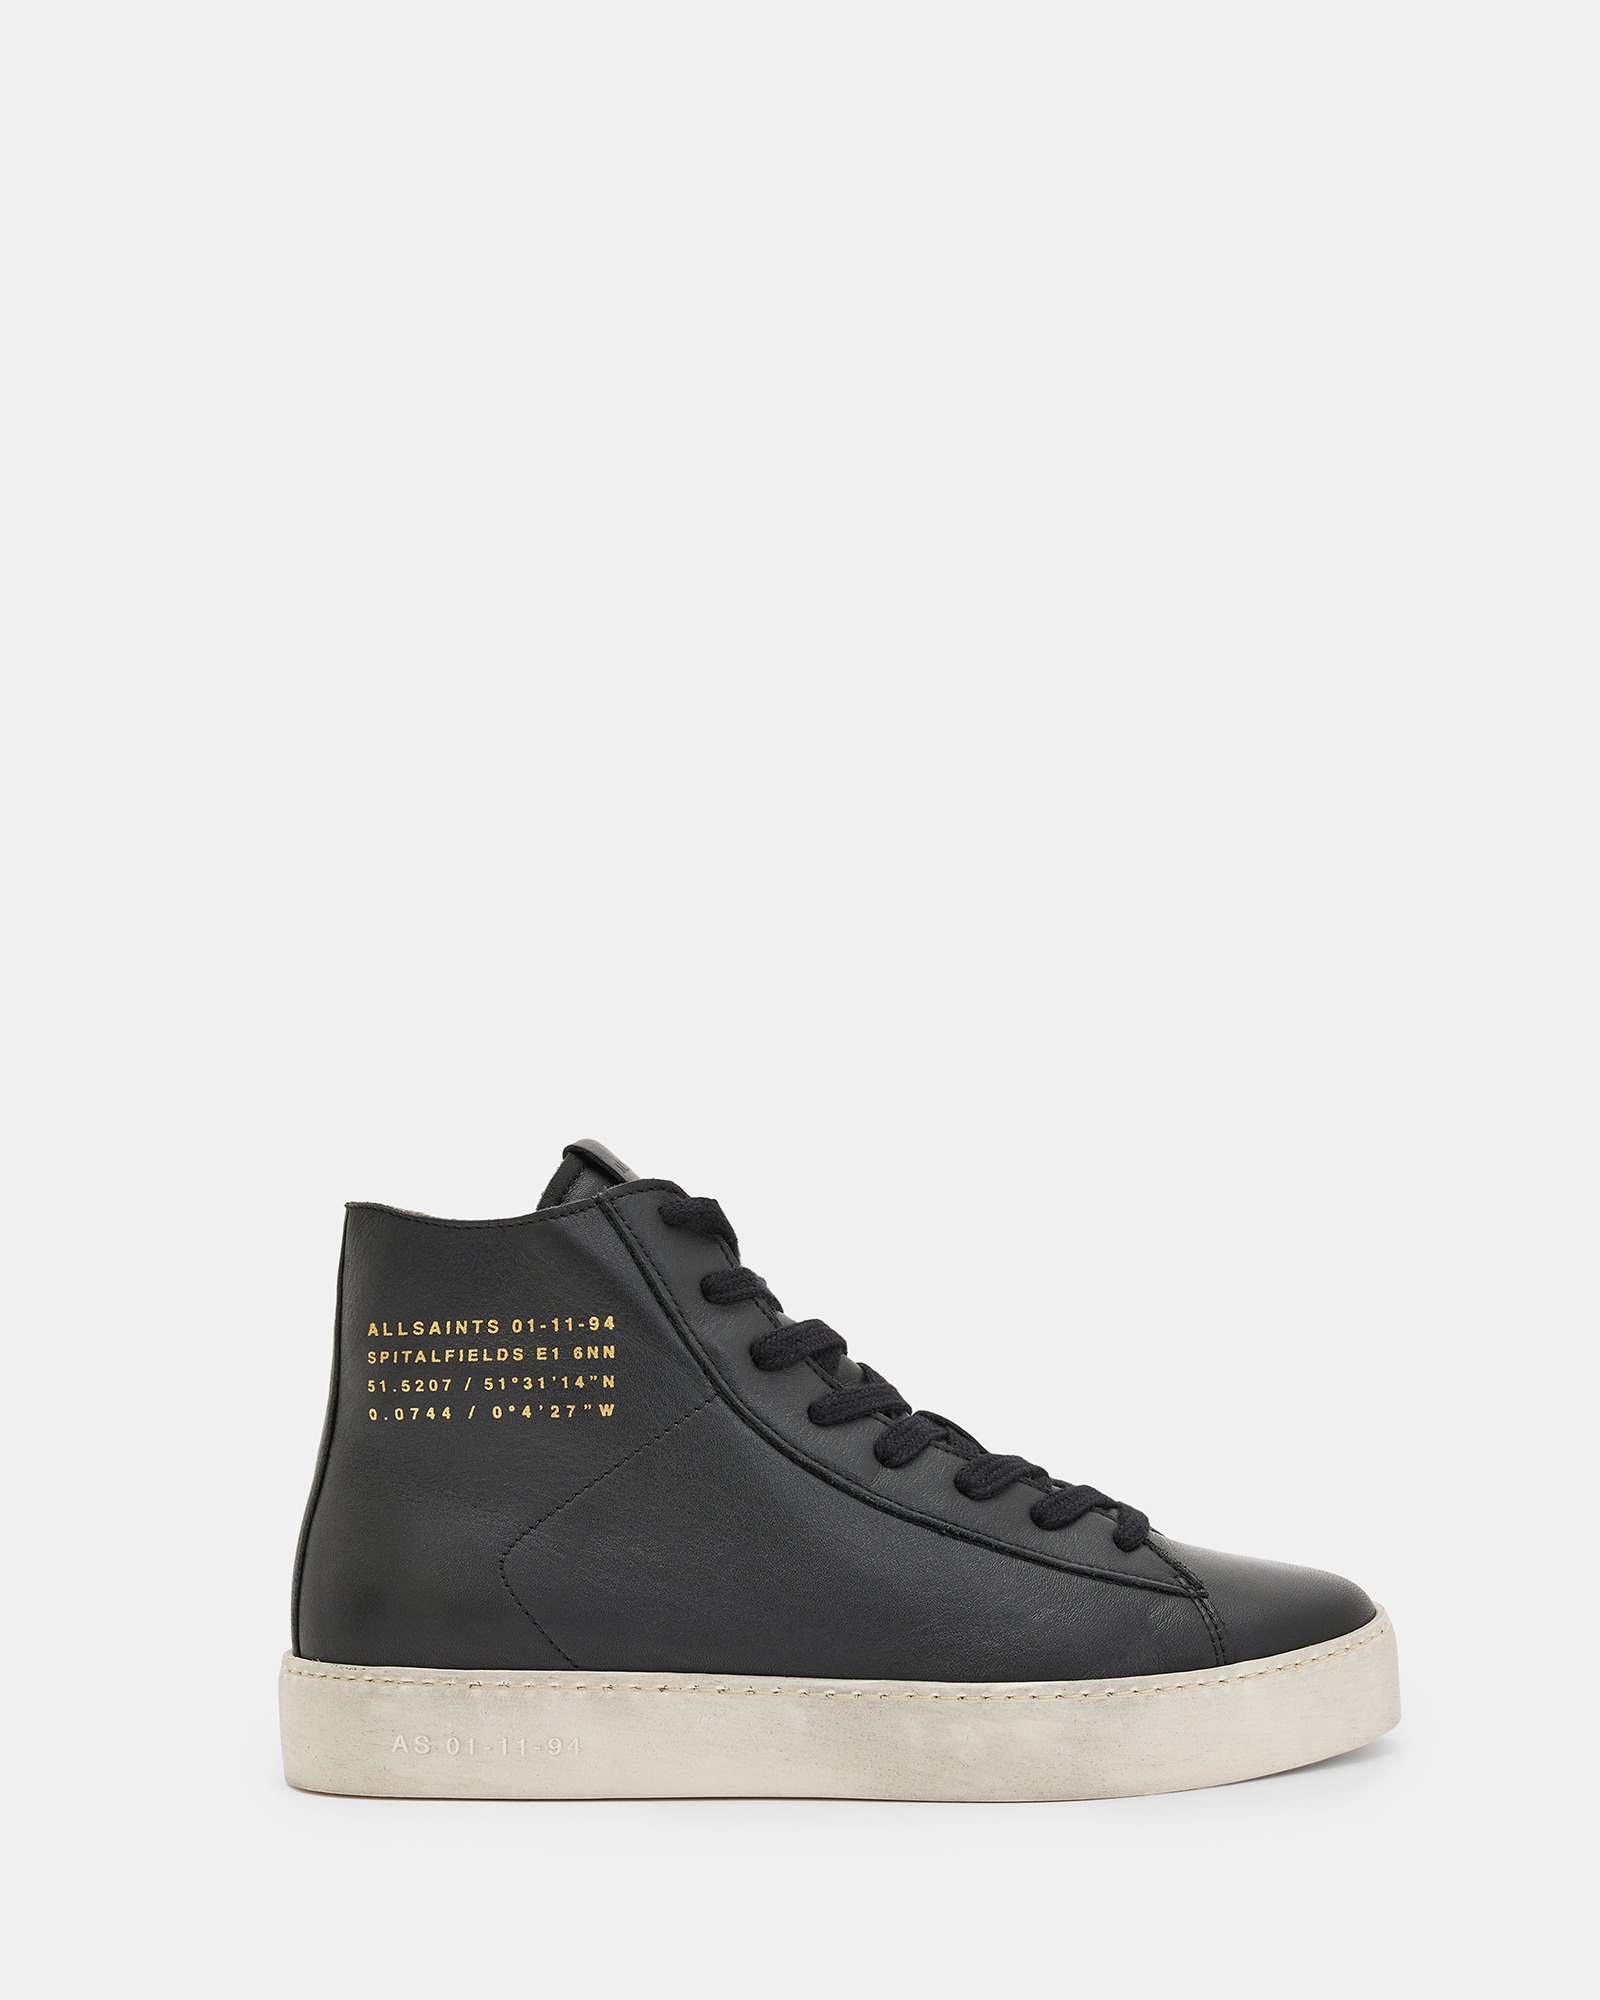 AllSaints Tana Leather High Top Sneakers